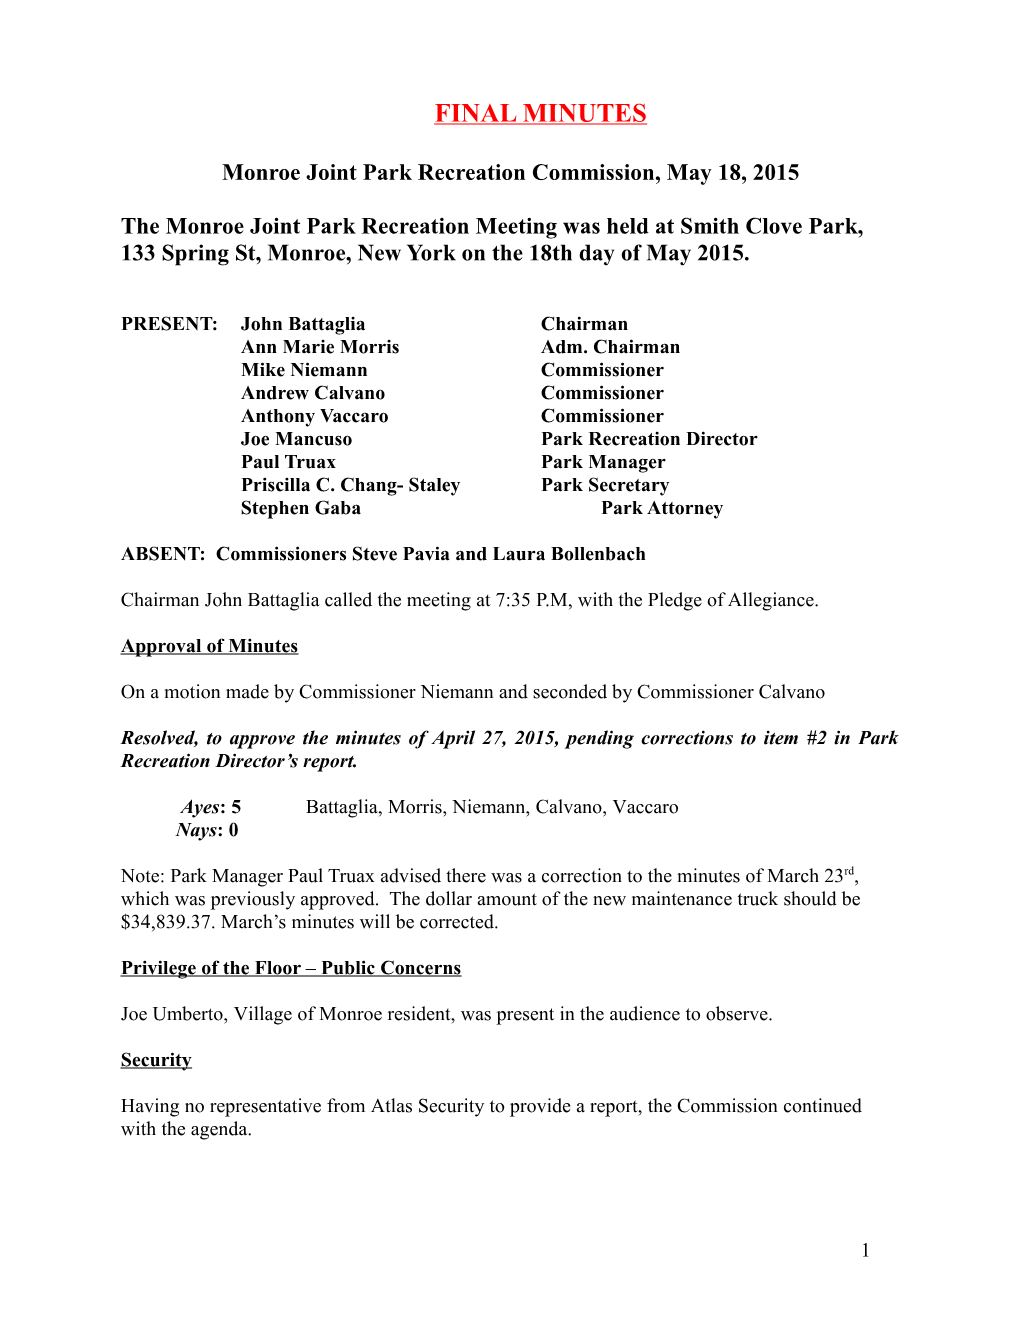 Monroe Joint Park Recreation Commission, May 18, 2015